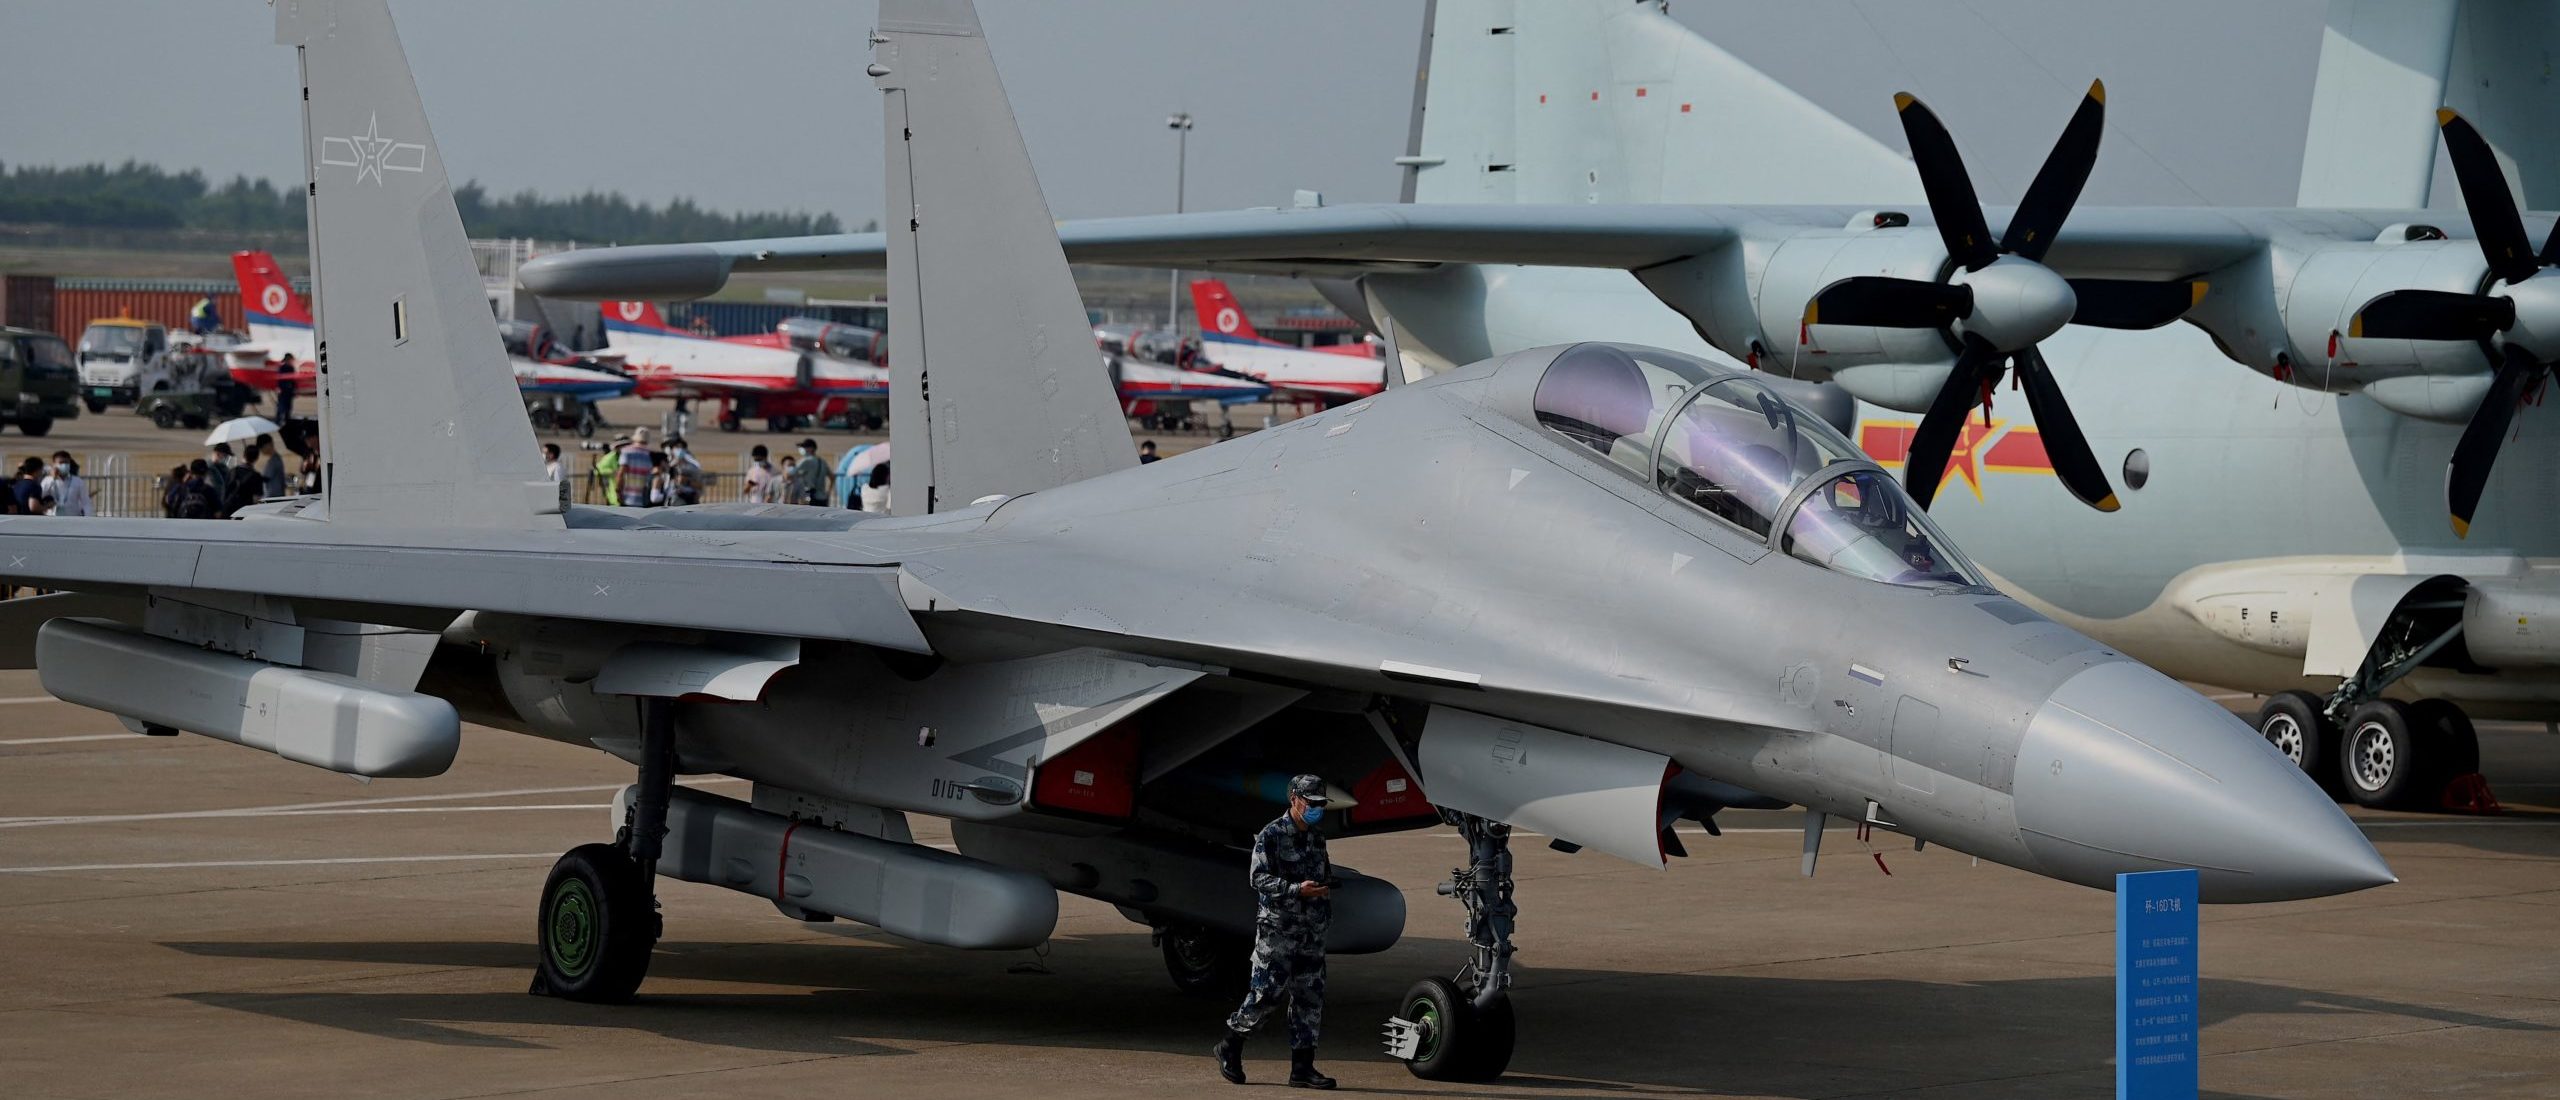 A military personnel walks past Shenyang Aircraft Corporation's J-16 multirole strike fighter for the People's Liberation Army Air Force (PLAAF) at the 13th China International Aviation and Aerospace Exhibition in Zhuhai in southern China's Guangdong province on September 28, 2021. (Photo by Noel Celis / AFP) (Photo by NOEL CELIS/AFP via Getty Images)